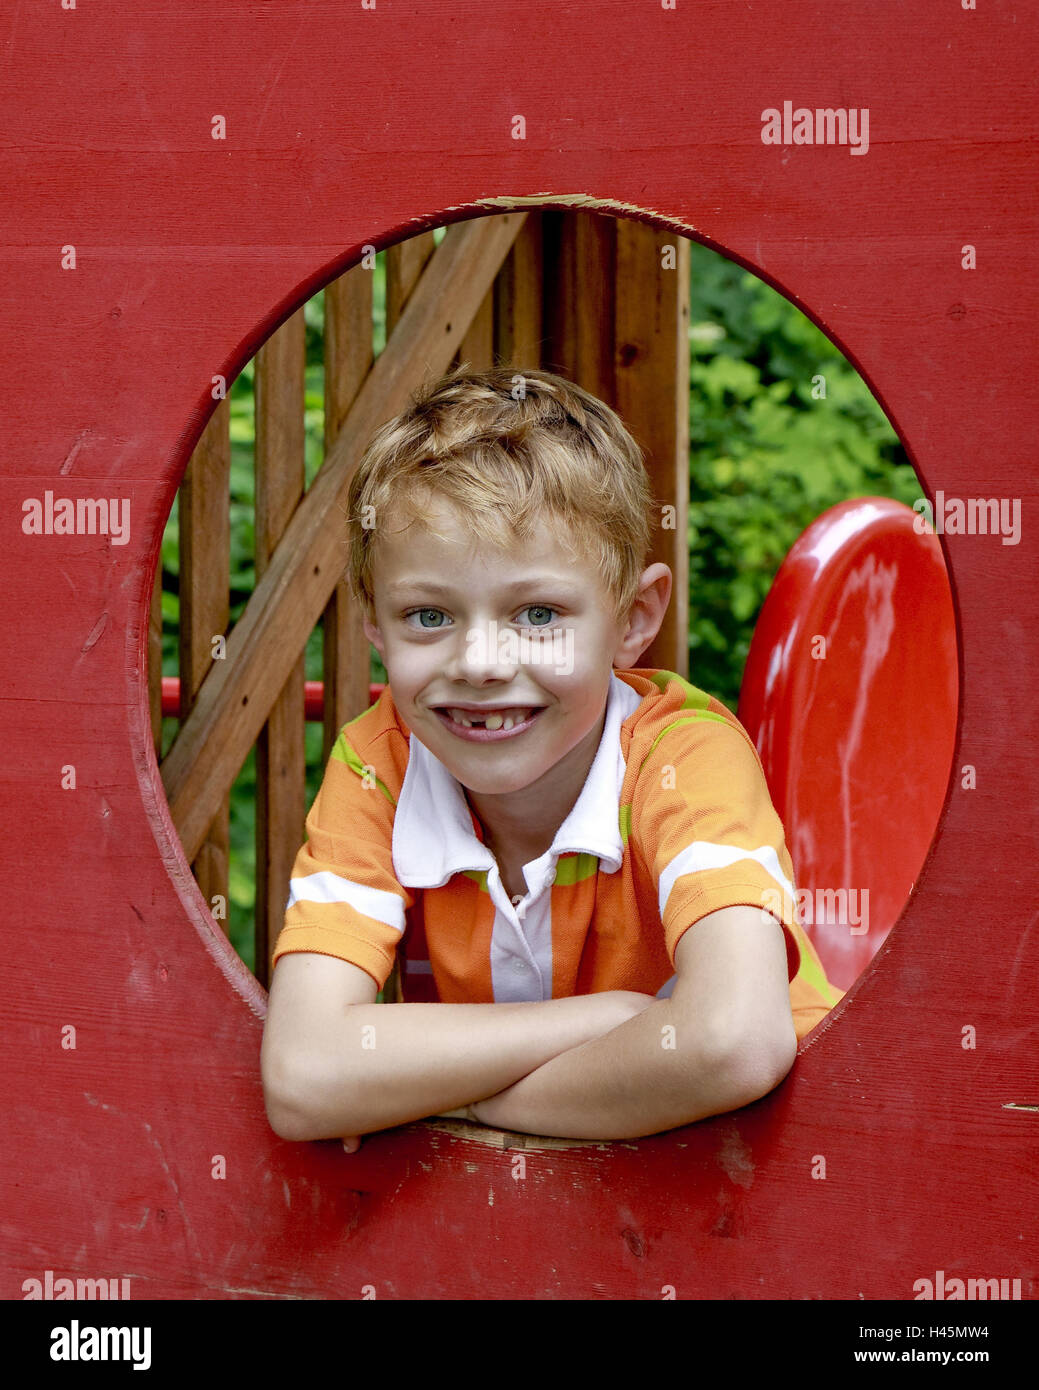 A boy, 7 years old, on a playground, looks by an orifice, portrait, model released, Stock Photo